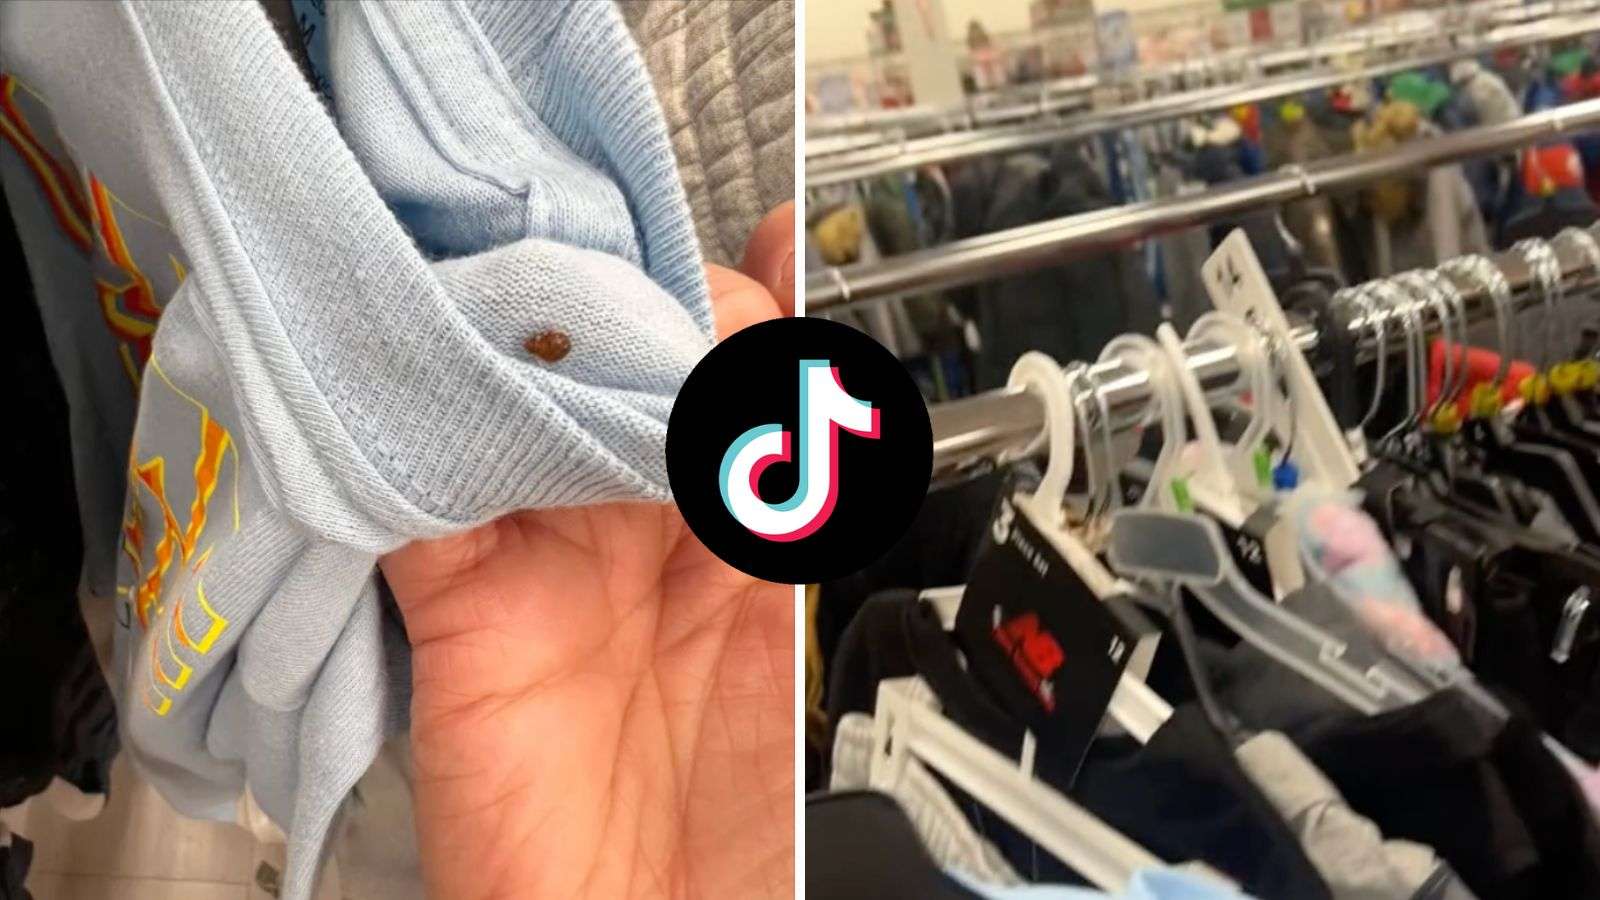 Burlington customer horrified after finding bed bugs on clothes